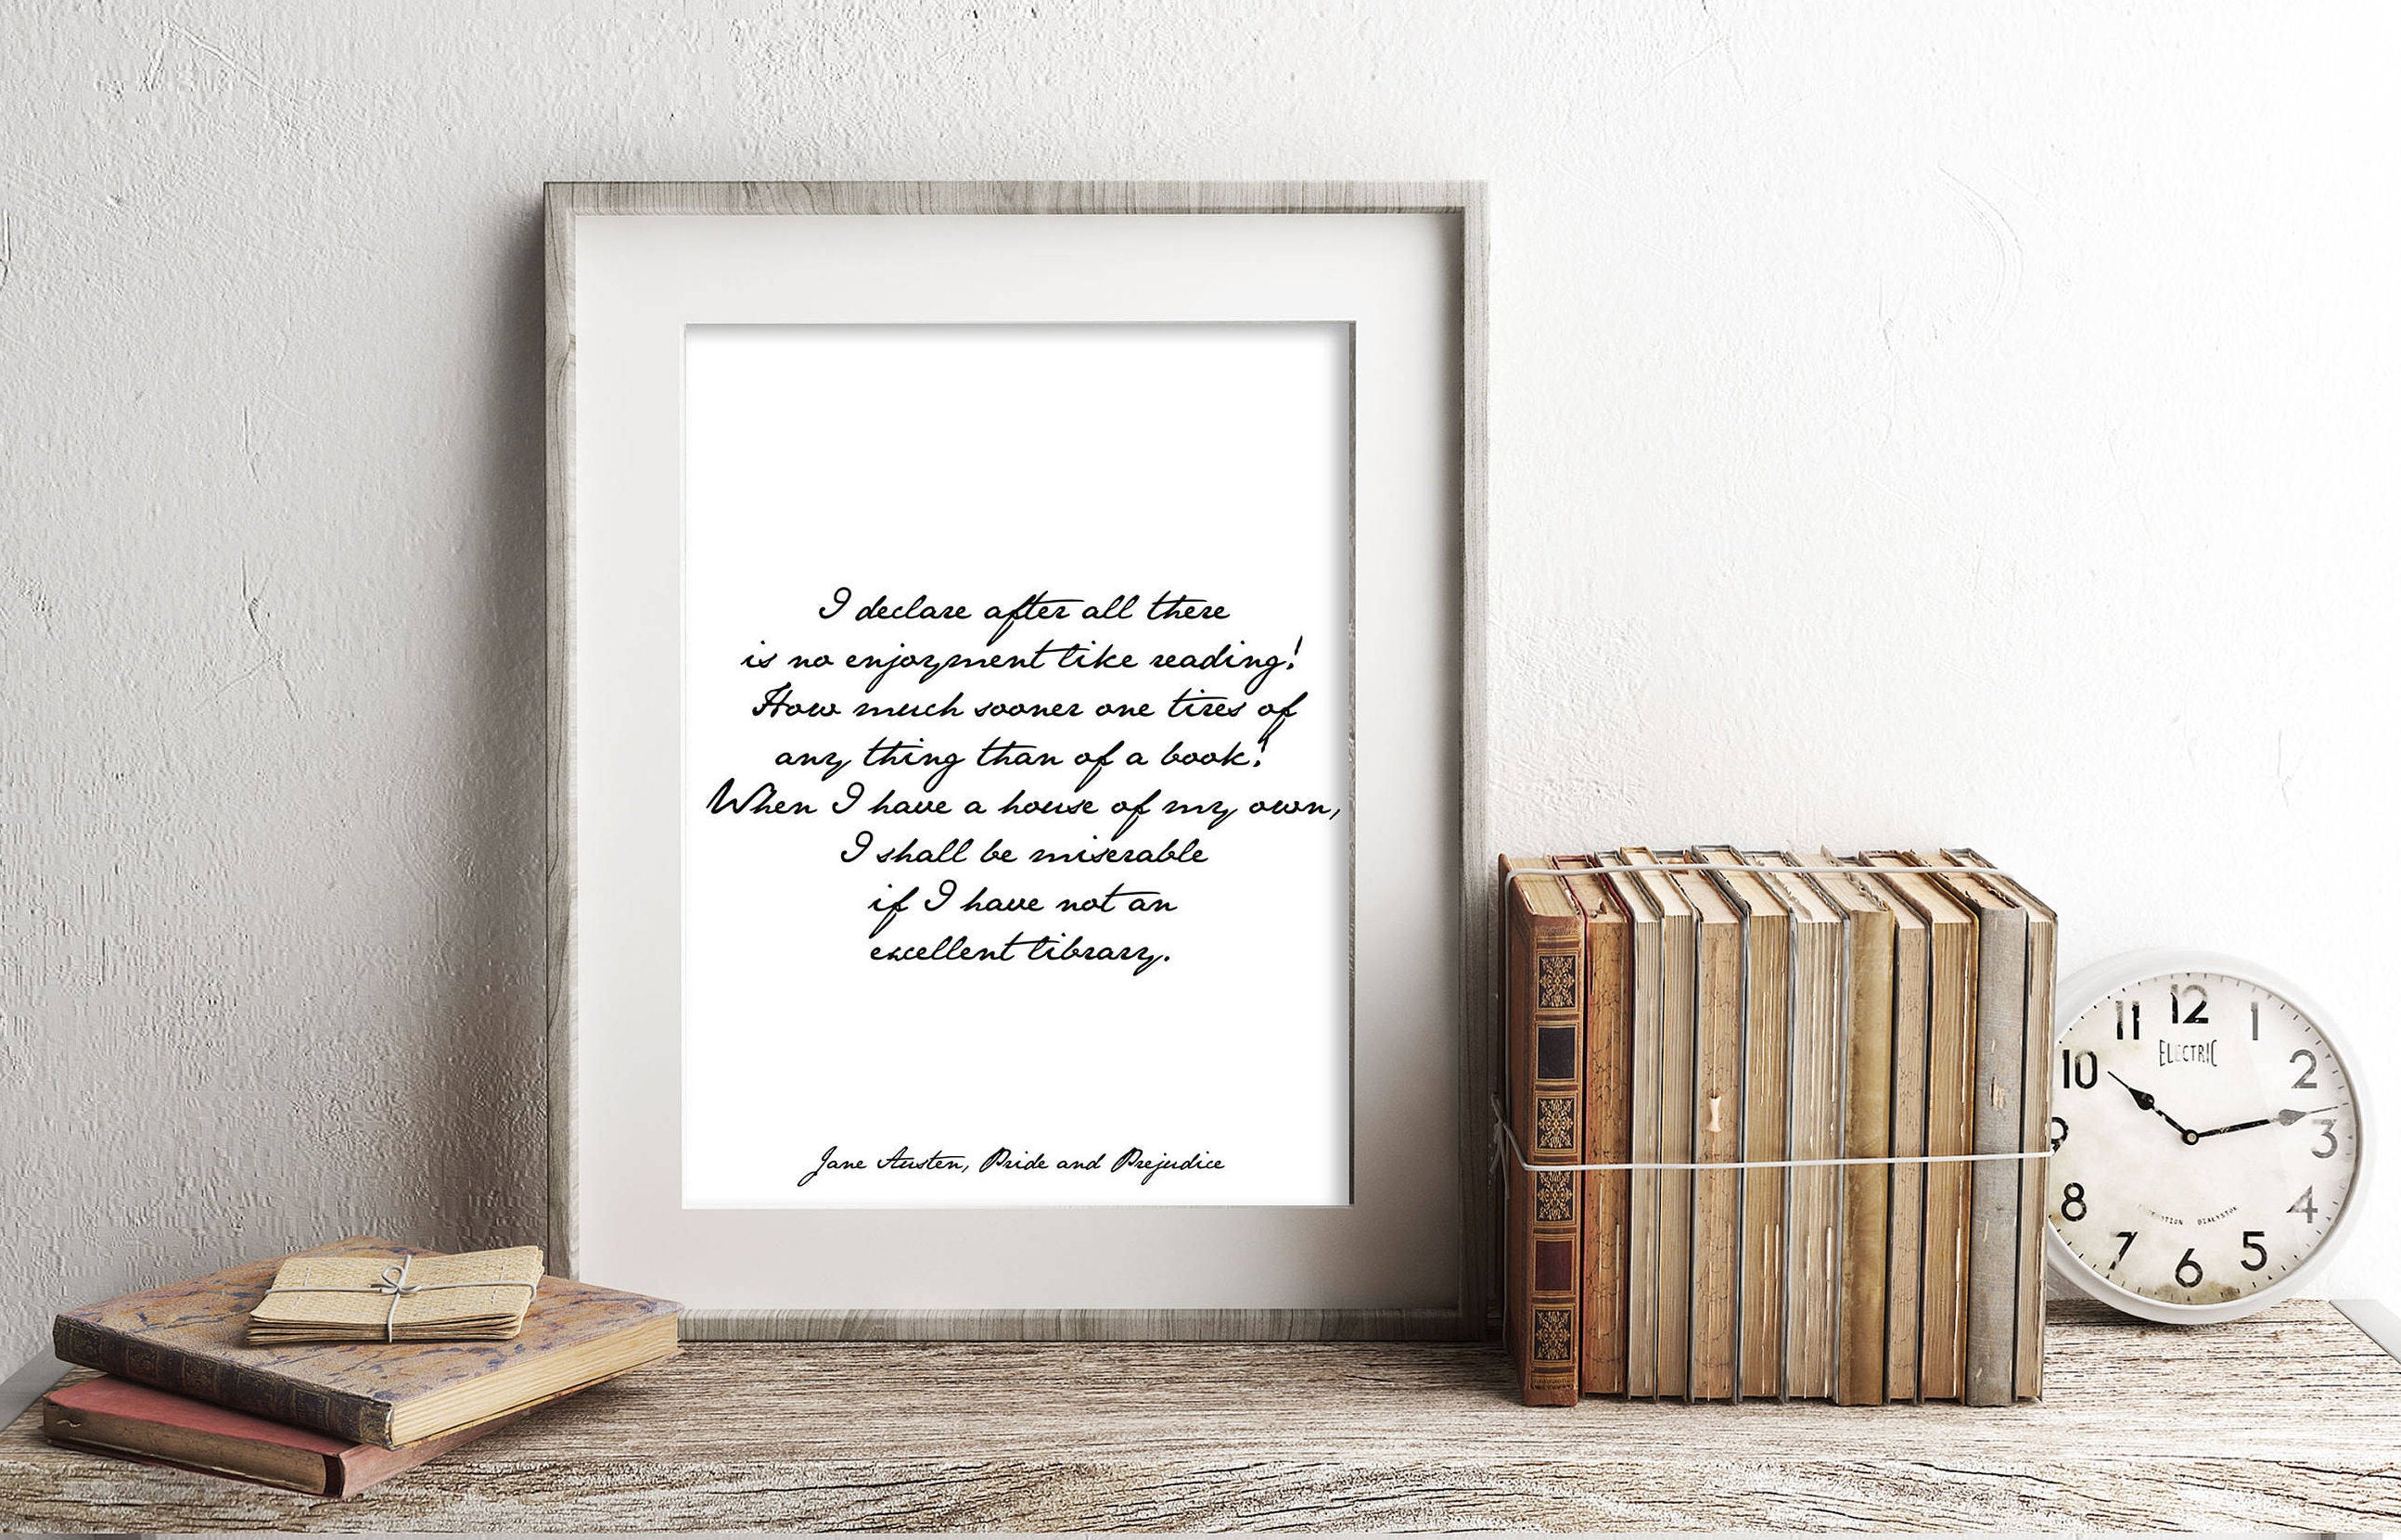 Pride and Prejudice Print Reading Quote, Jane Austen Quote Art, No Enjoyment Like Reading Book Quote Print, Jane Austen Wall Art Unframed - BookQuoteDecor